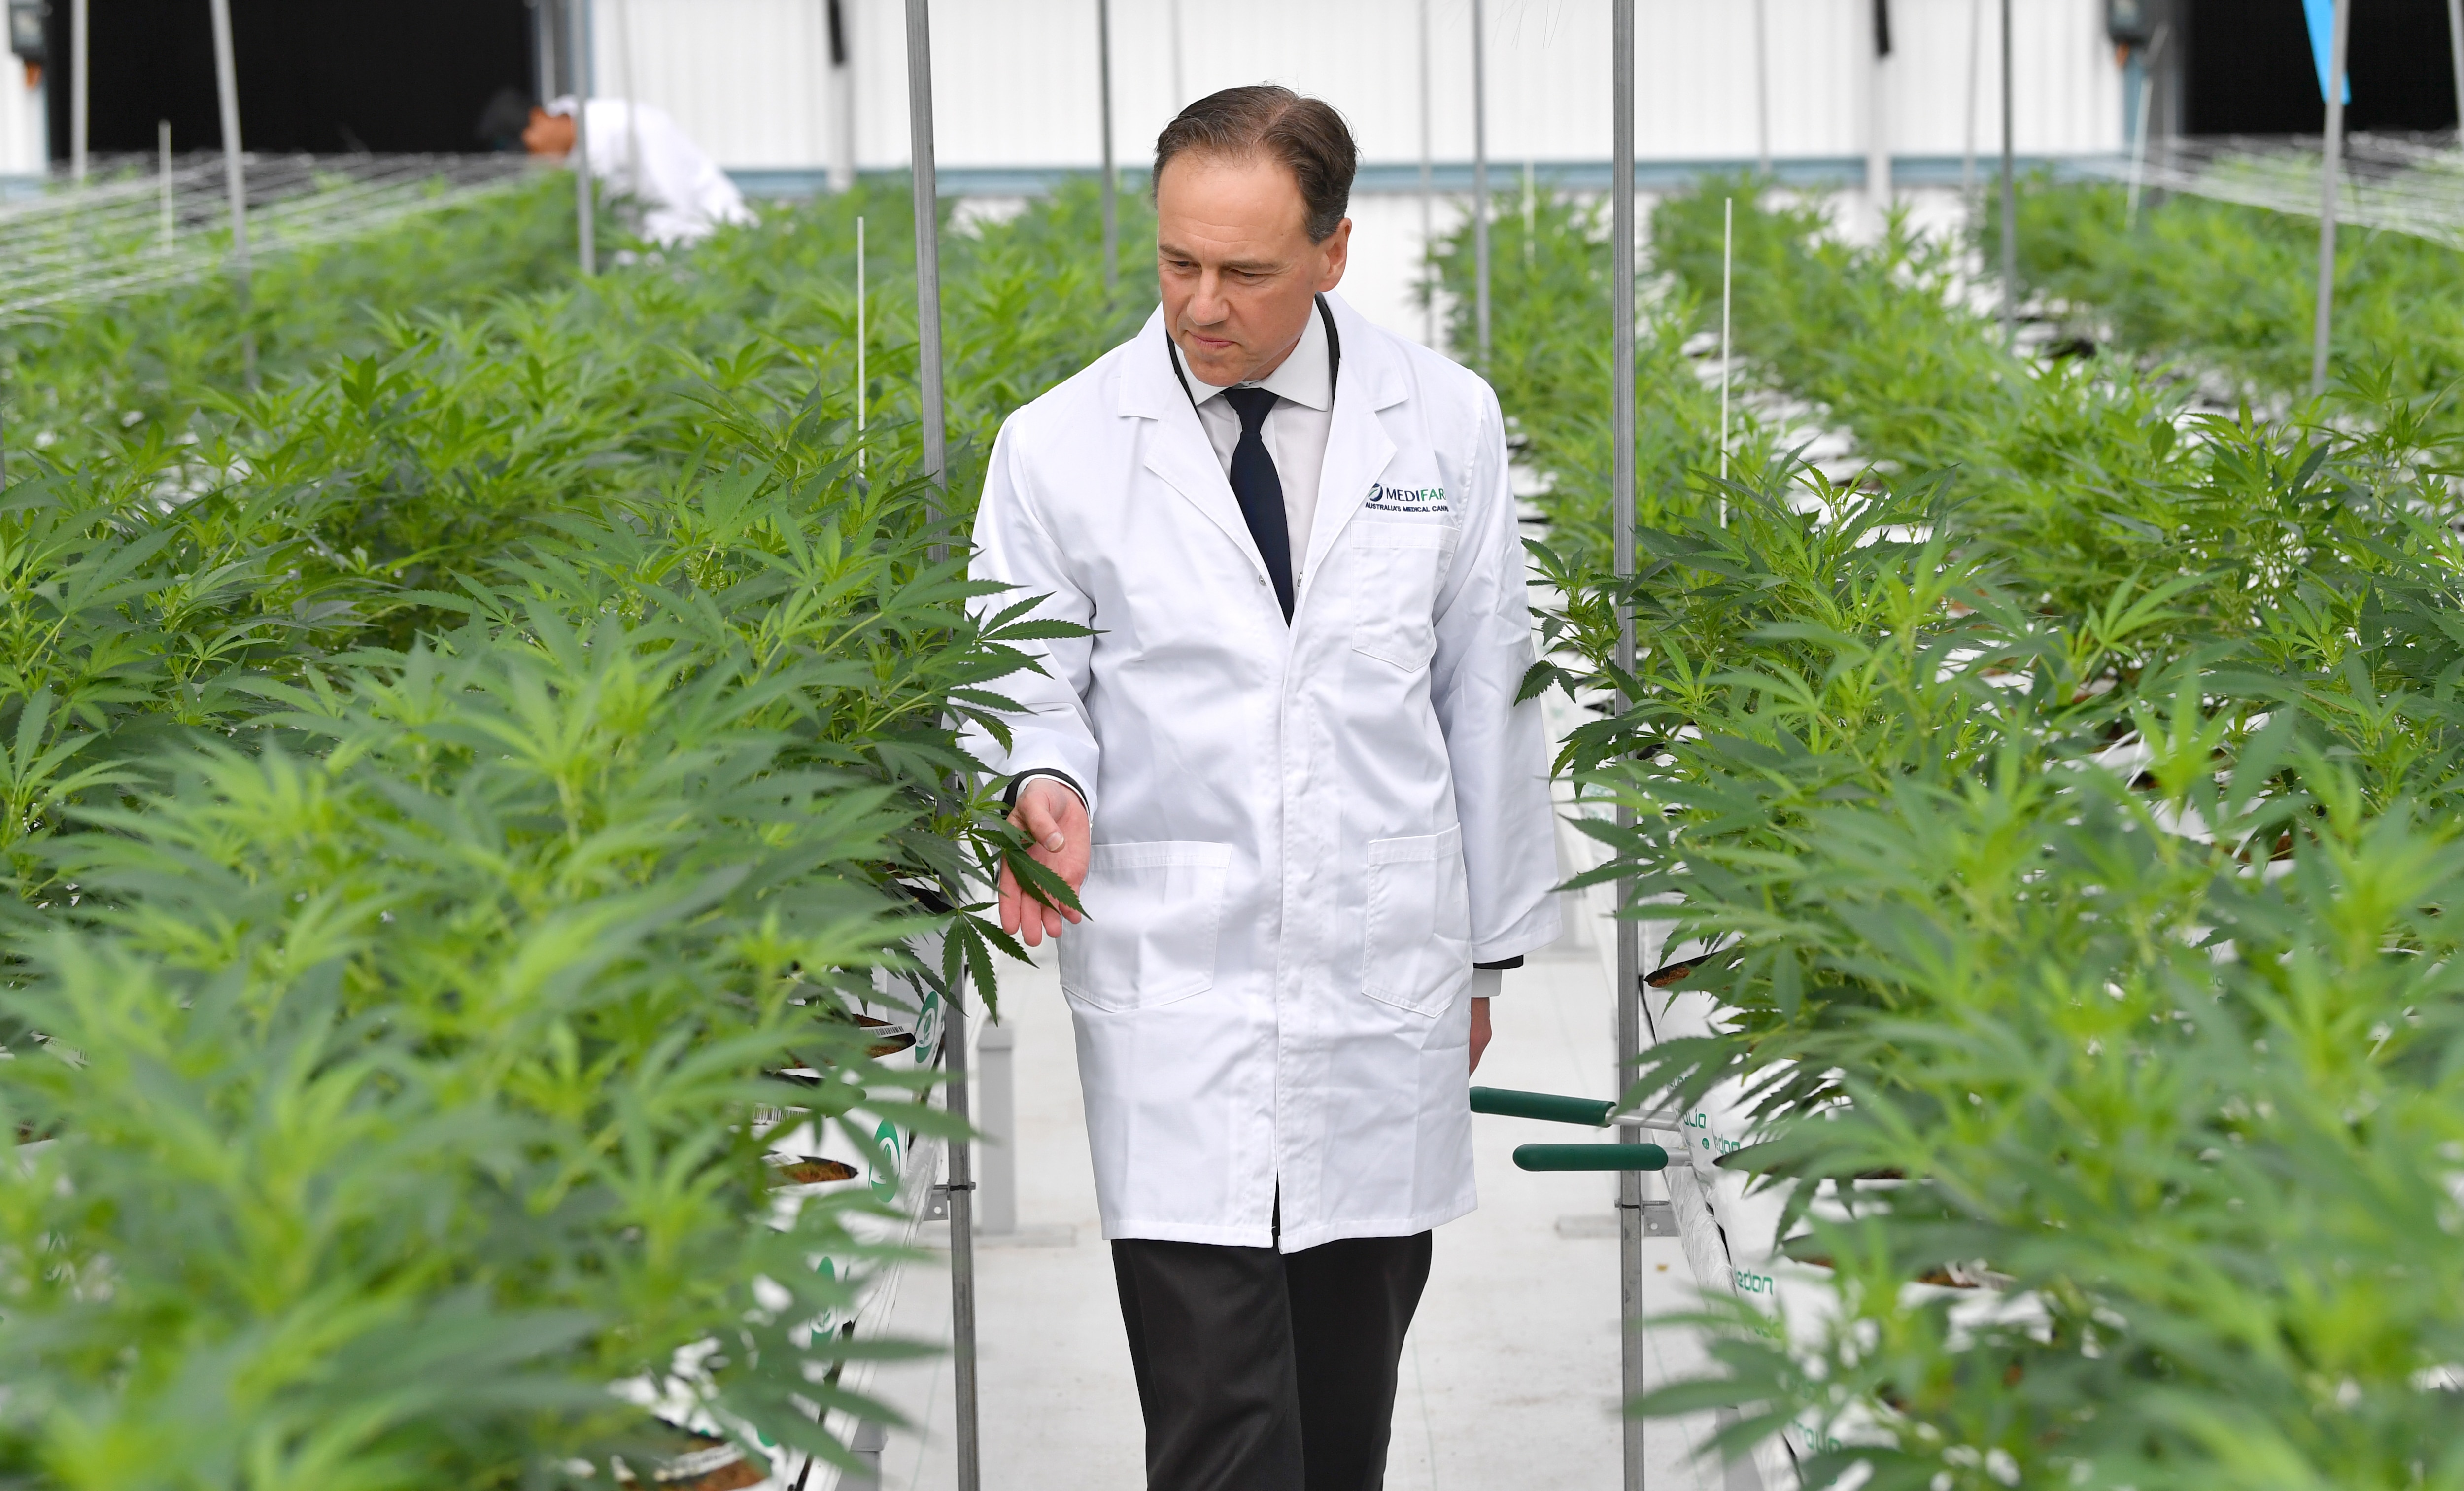 Health Minister Greg Hunt is seen inspecting the cannabis plants.